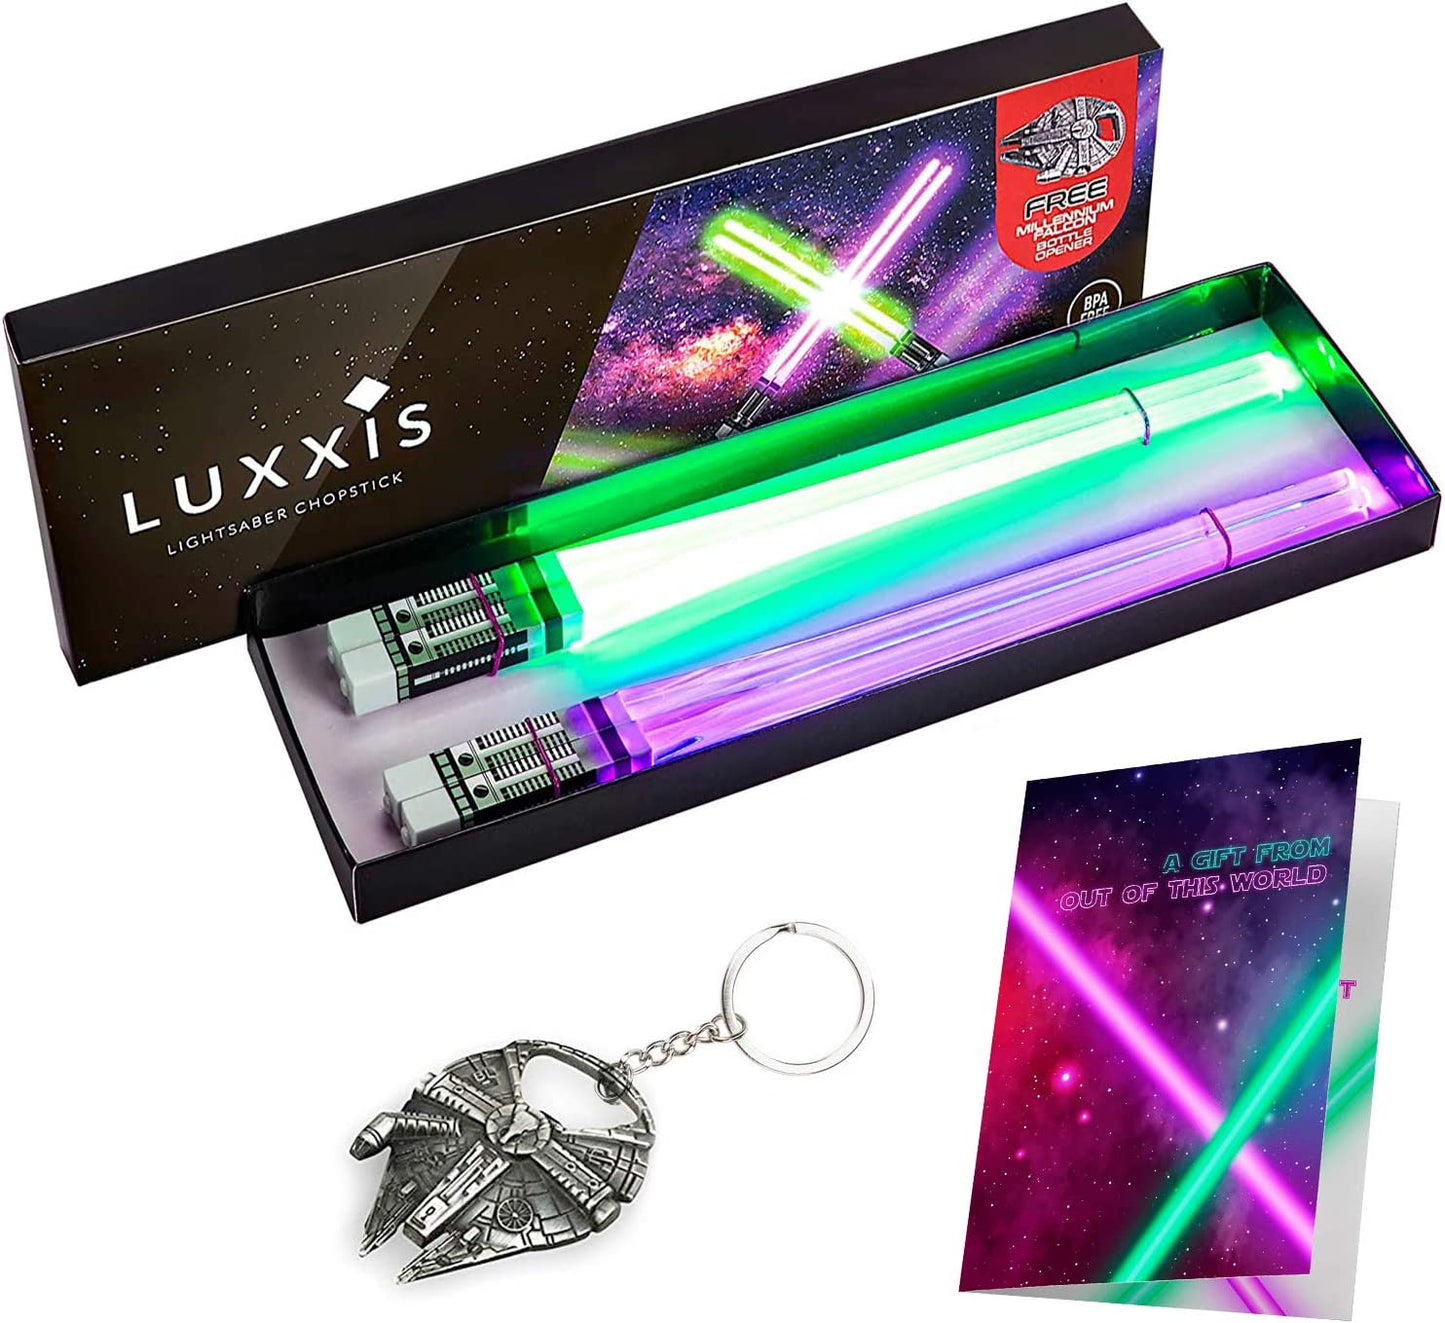 An opened box of light up Star Wars LED chopsticks in green and purple. There is a Millennium Falcon bottle opener next to the box along with an instruction manual.